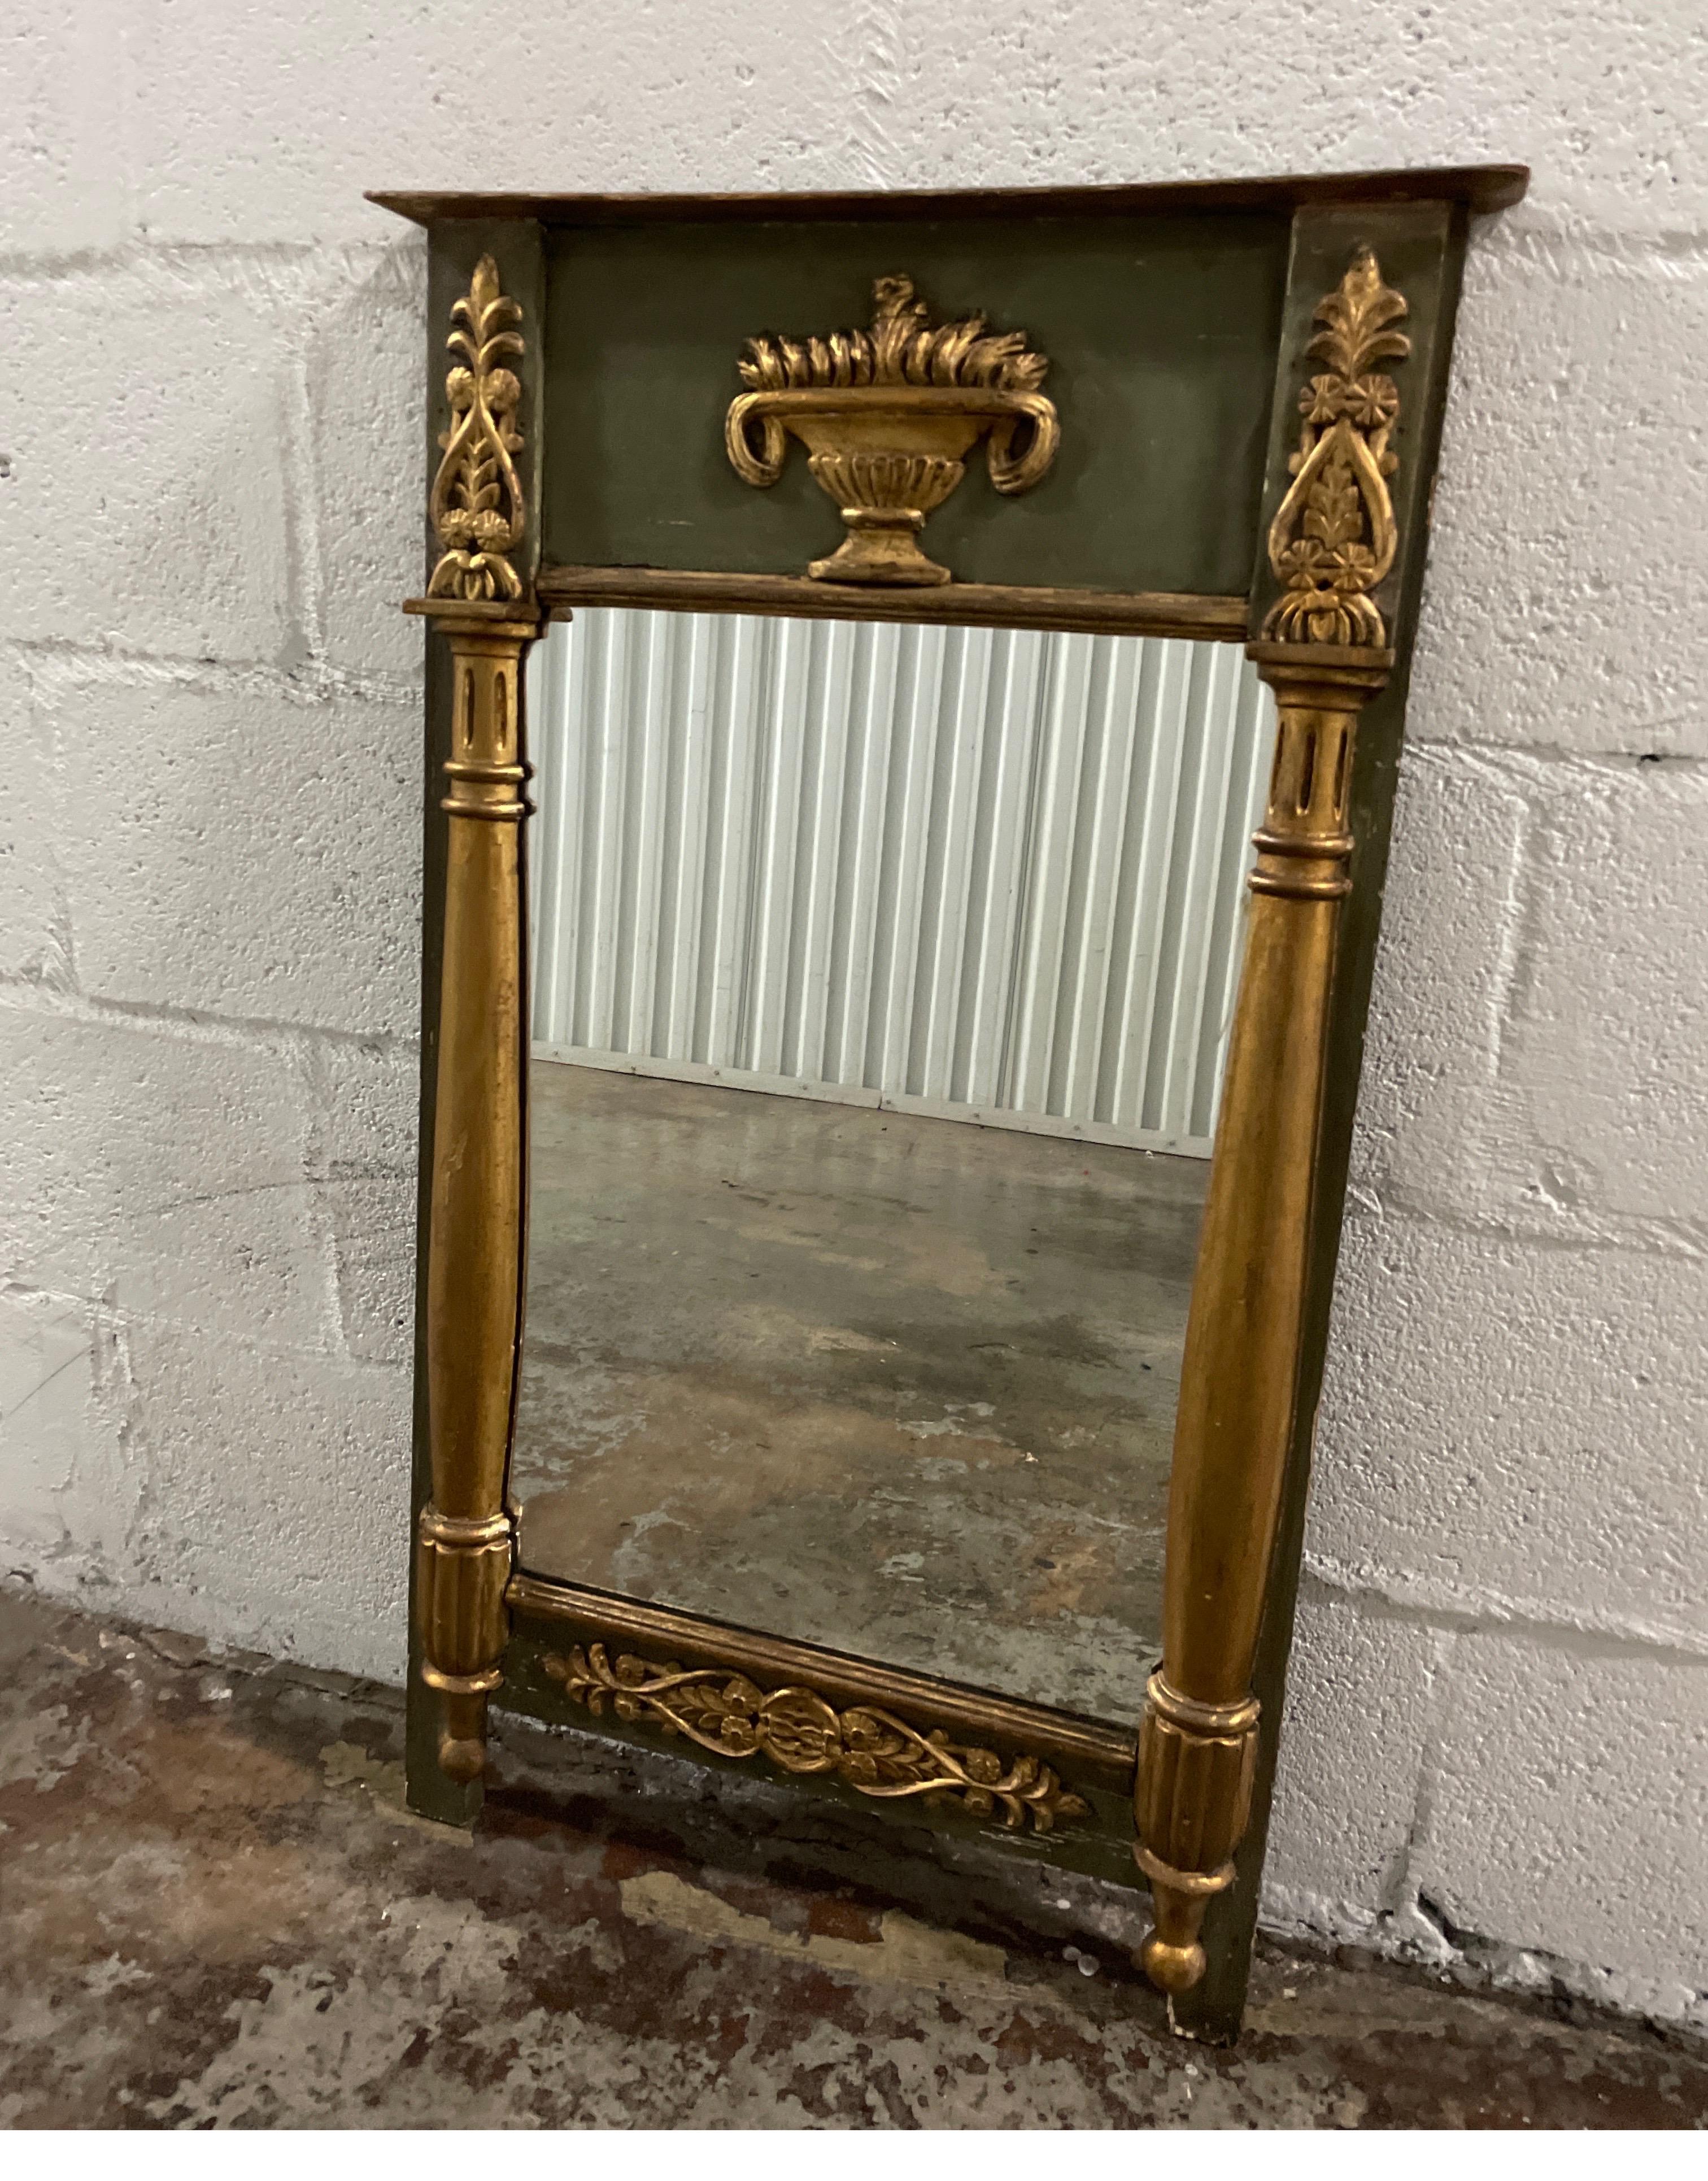 Carved & gilded French Empire mirror with original green painted finish.